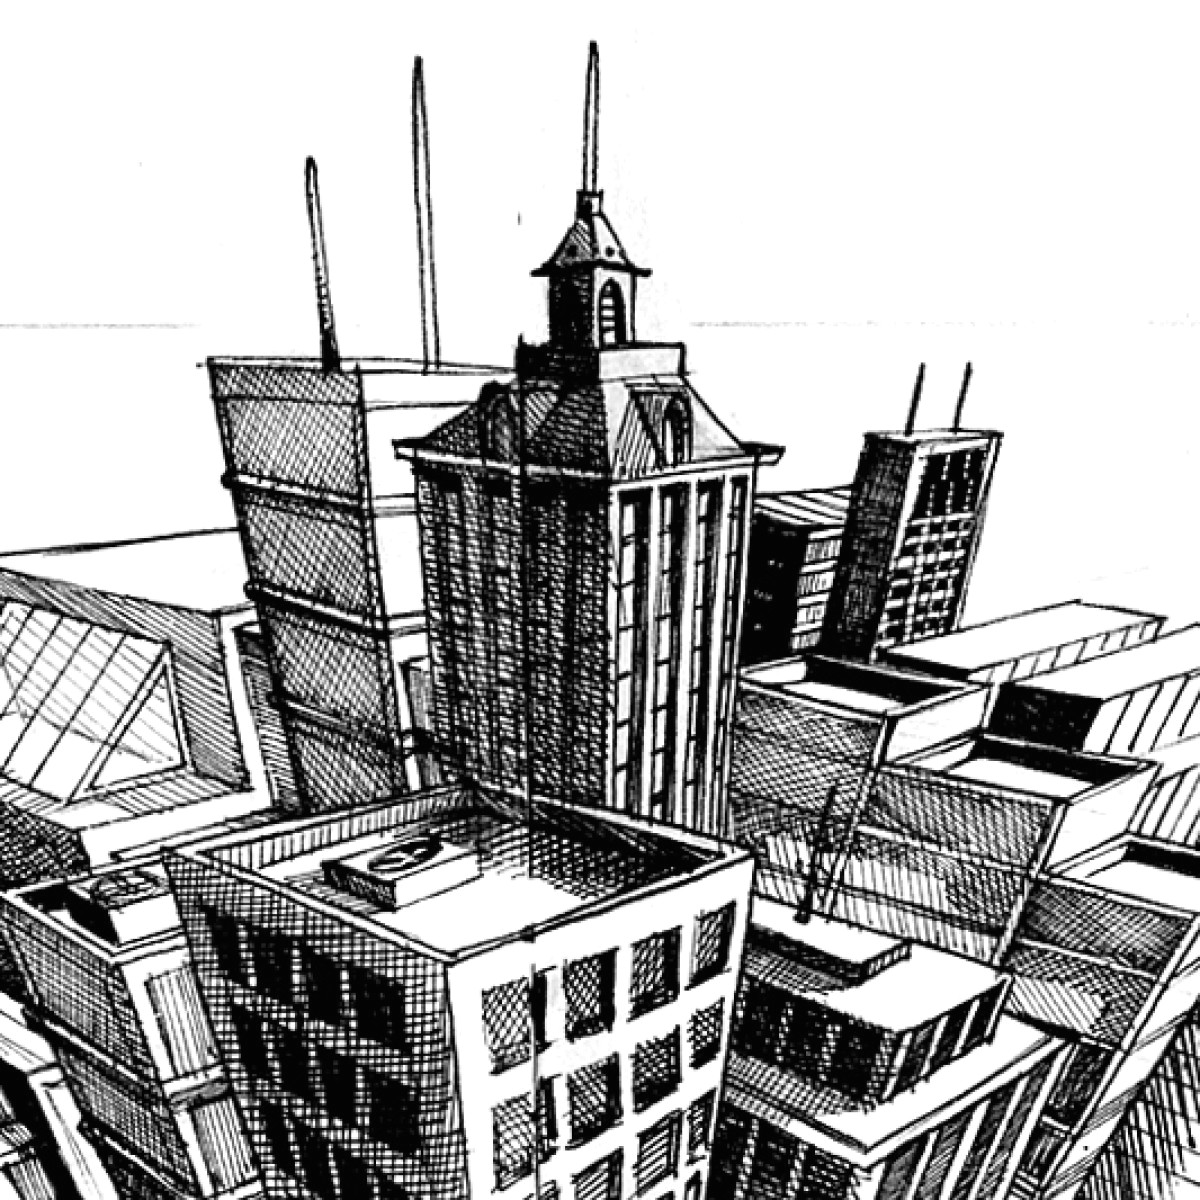 Drawing 4 Point Perspective A Step by Step Tutorial On the Basics Of Three Point Perspective